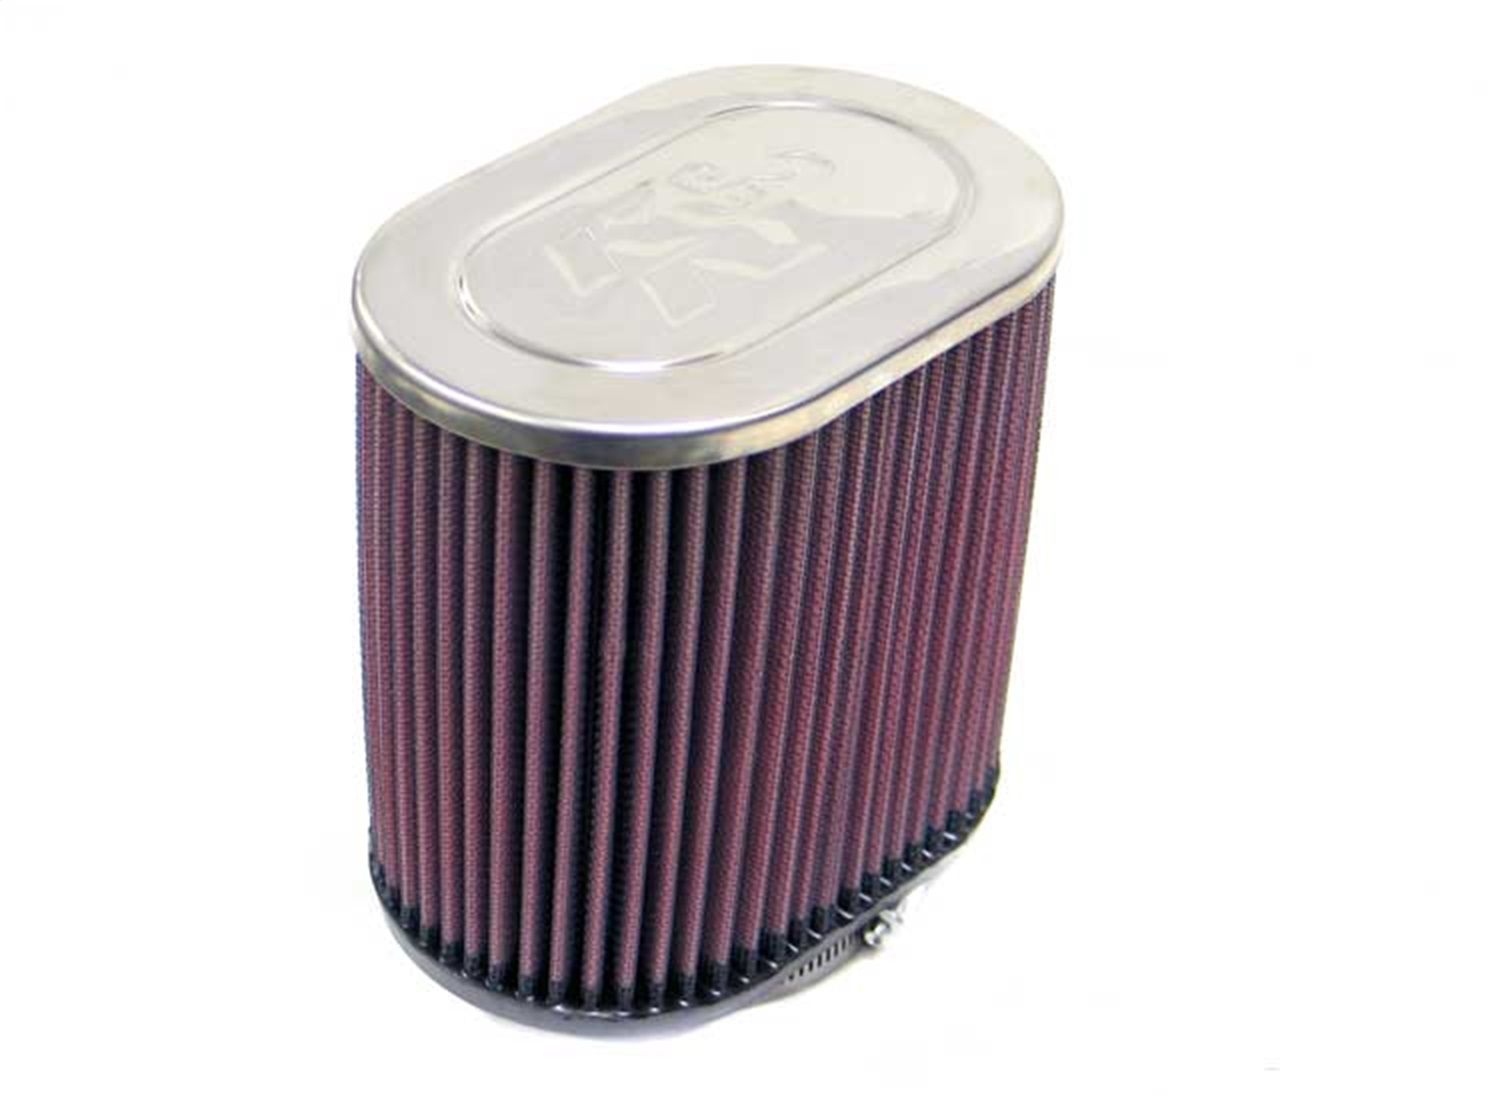 K&N Filters K&N Filters RC-1540 Universal Air Cleaner Assembly